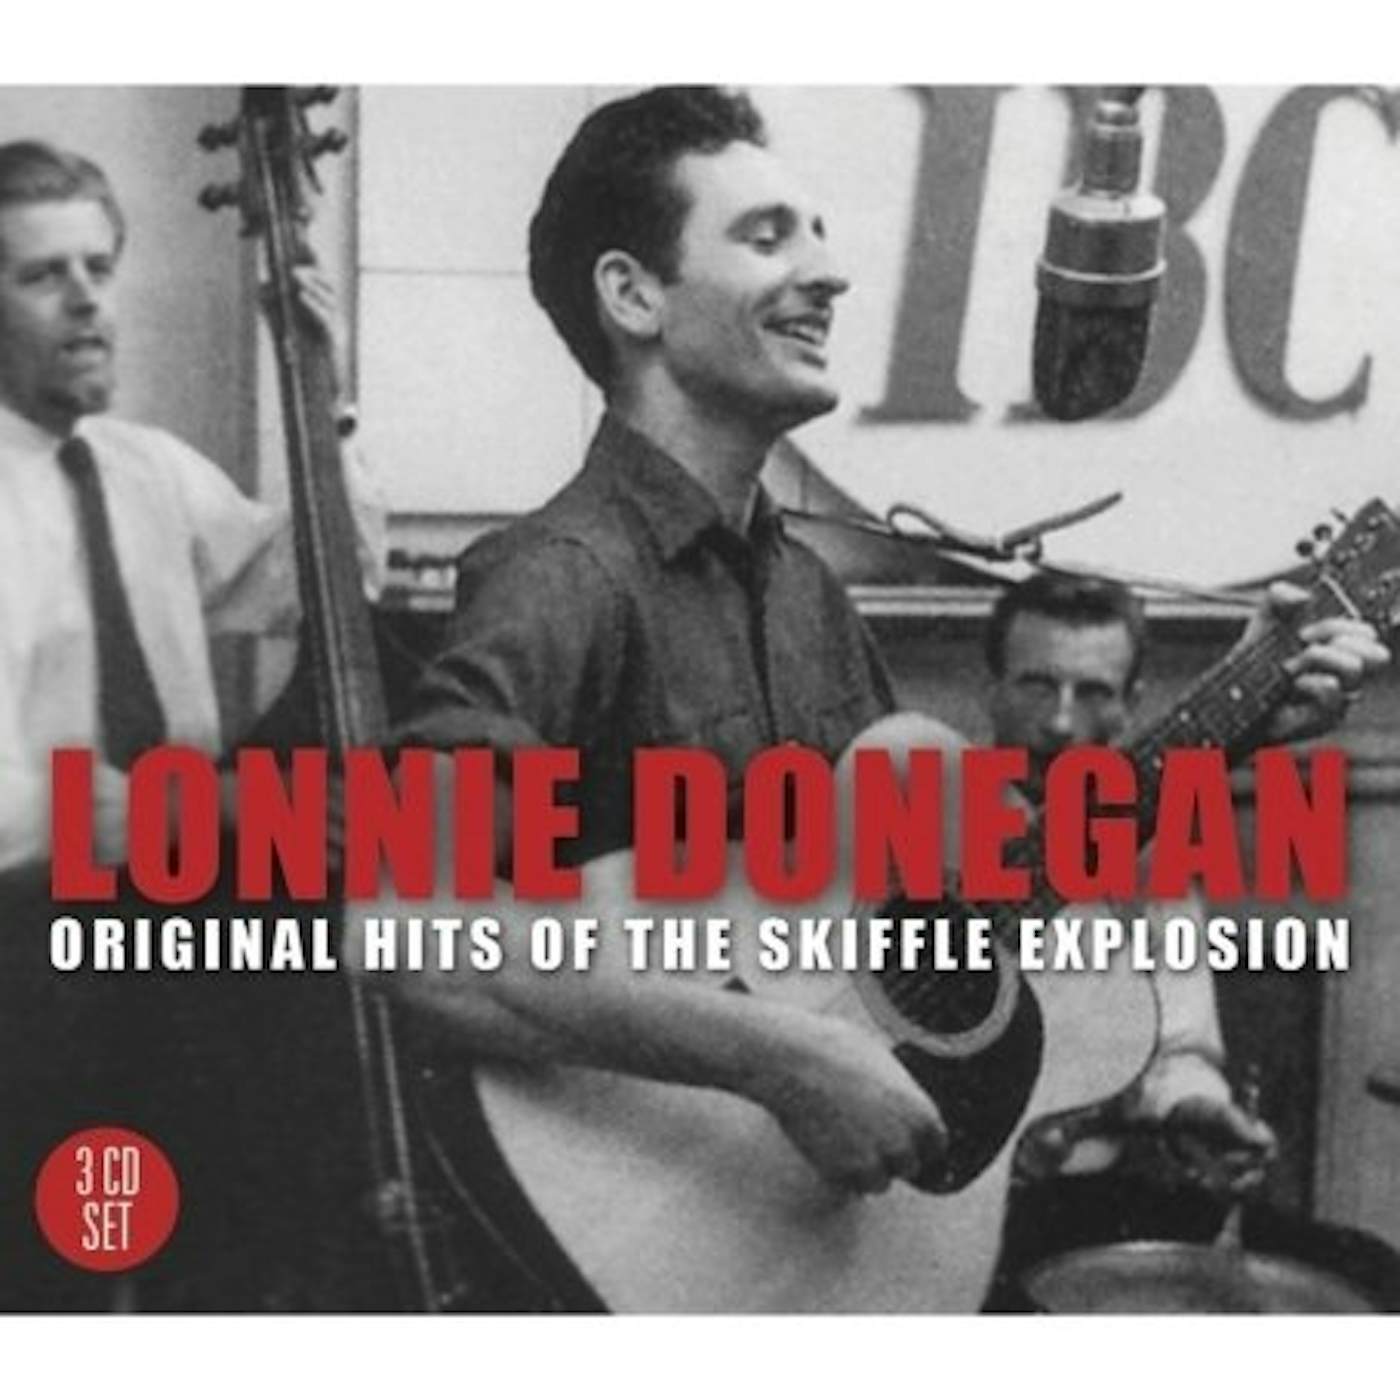 Lonnie Donegan ORIGINAL HITS OF THE SKIFFLE EXPLOSION CD